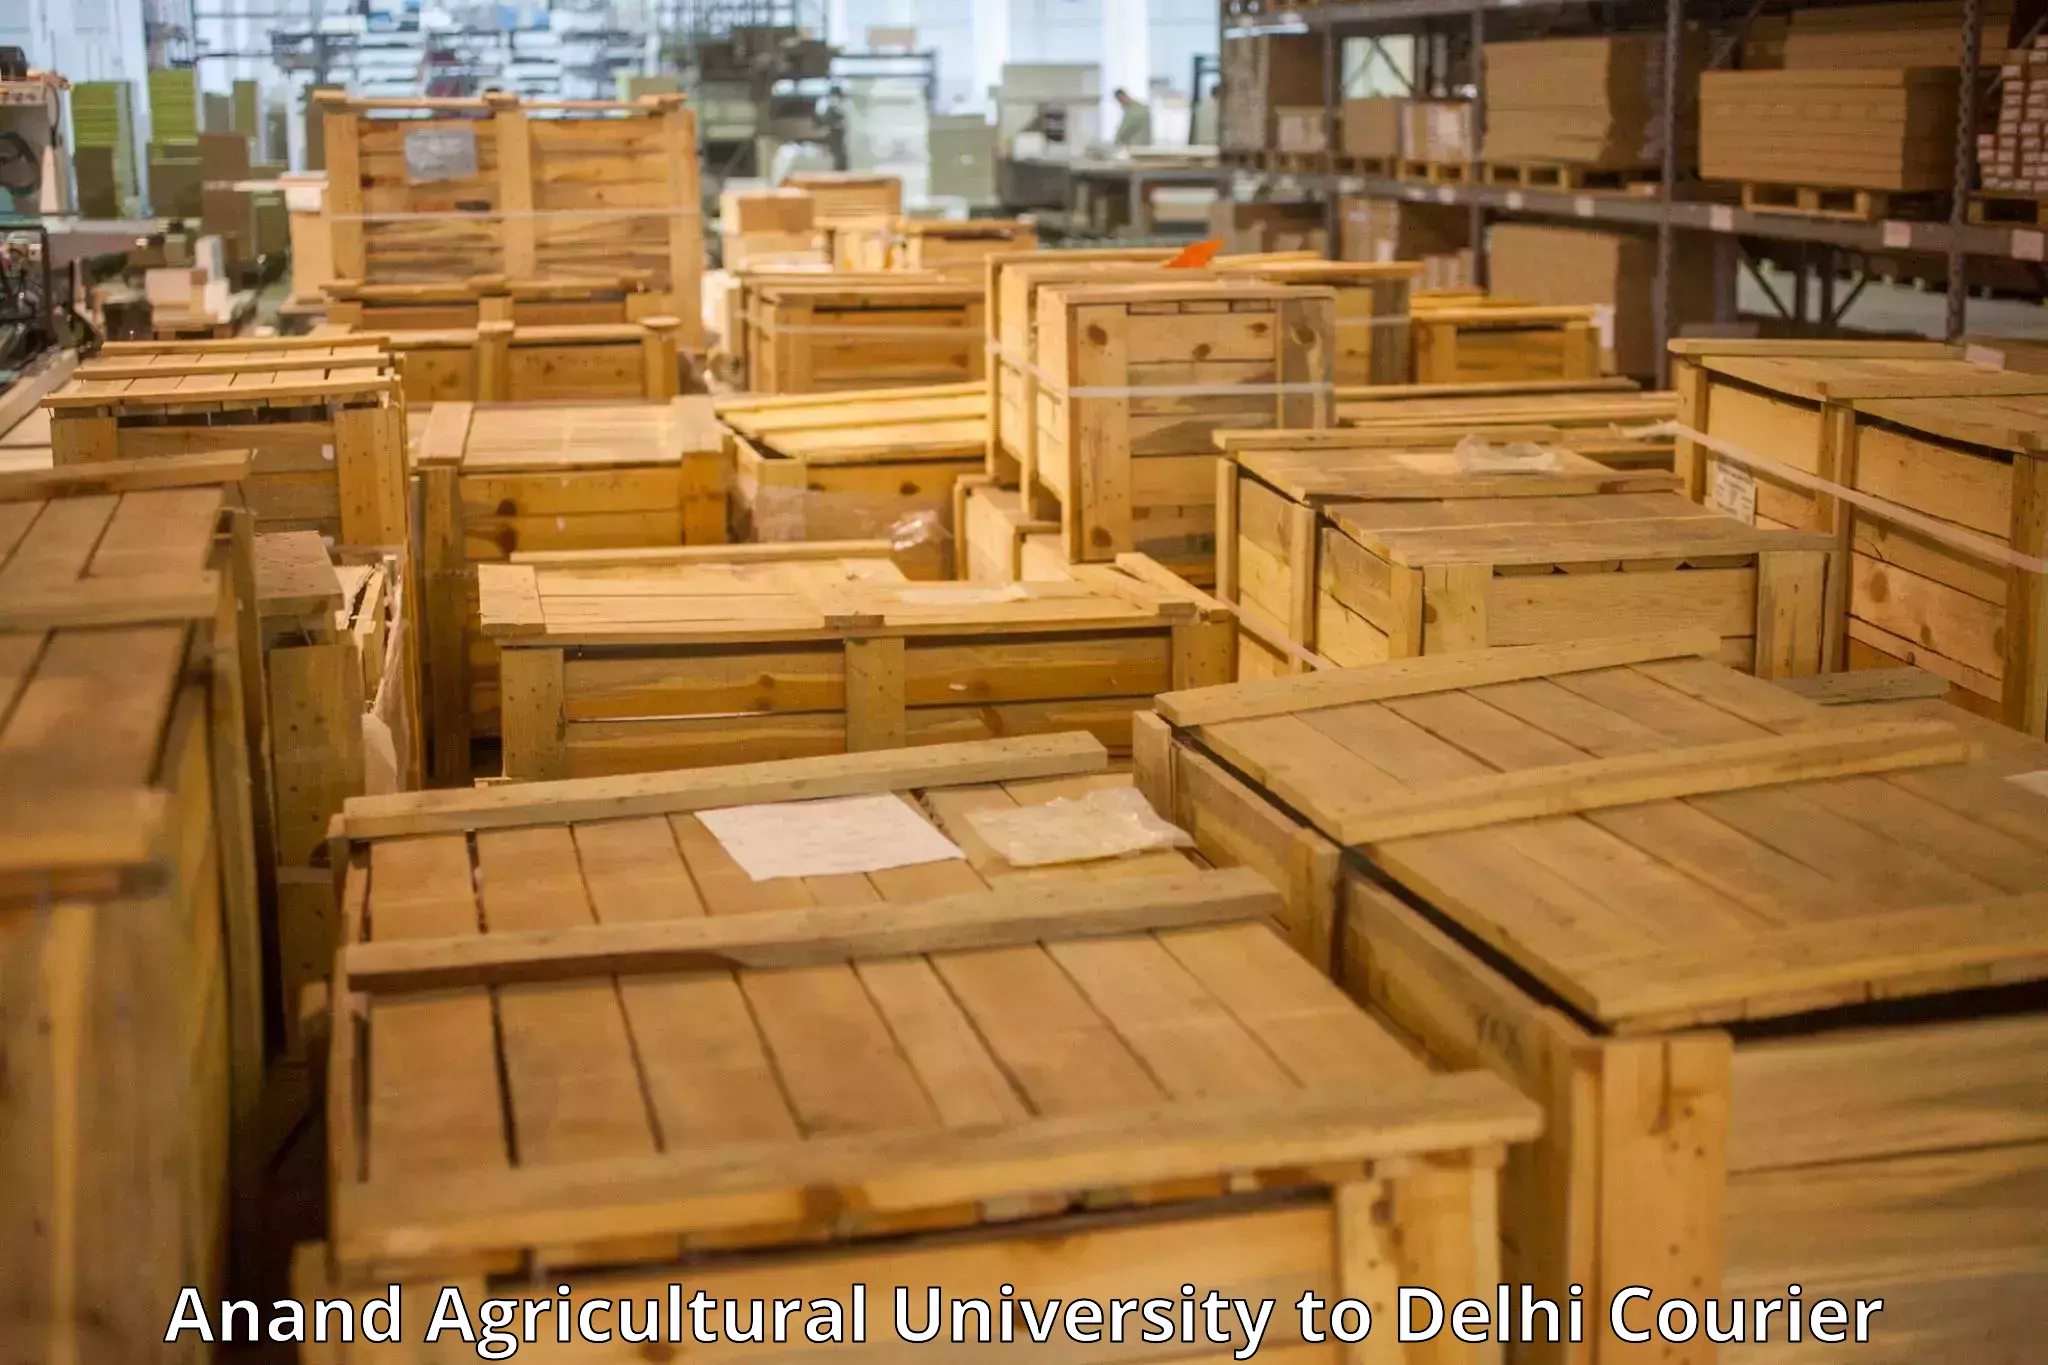 Multi-destination luggage transport Anand Agricultural University to NIT Delhi